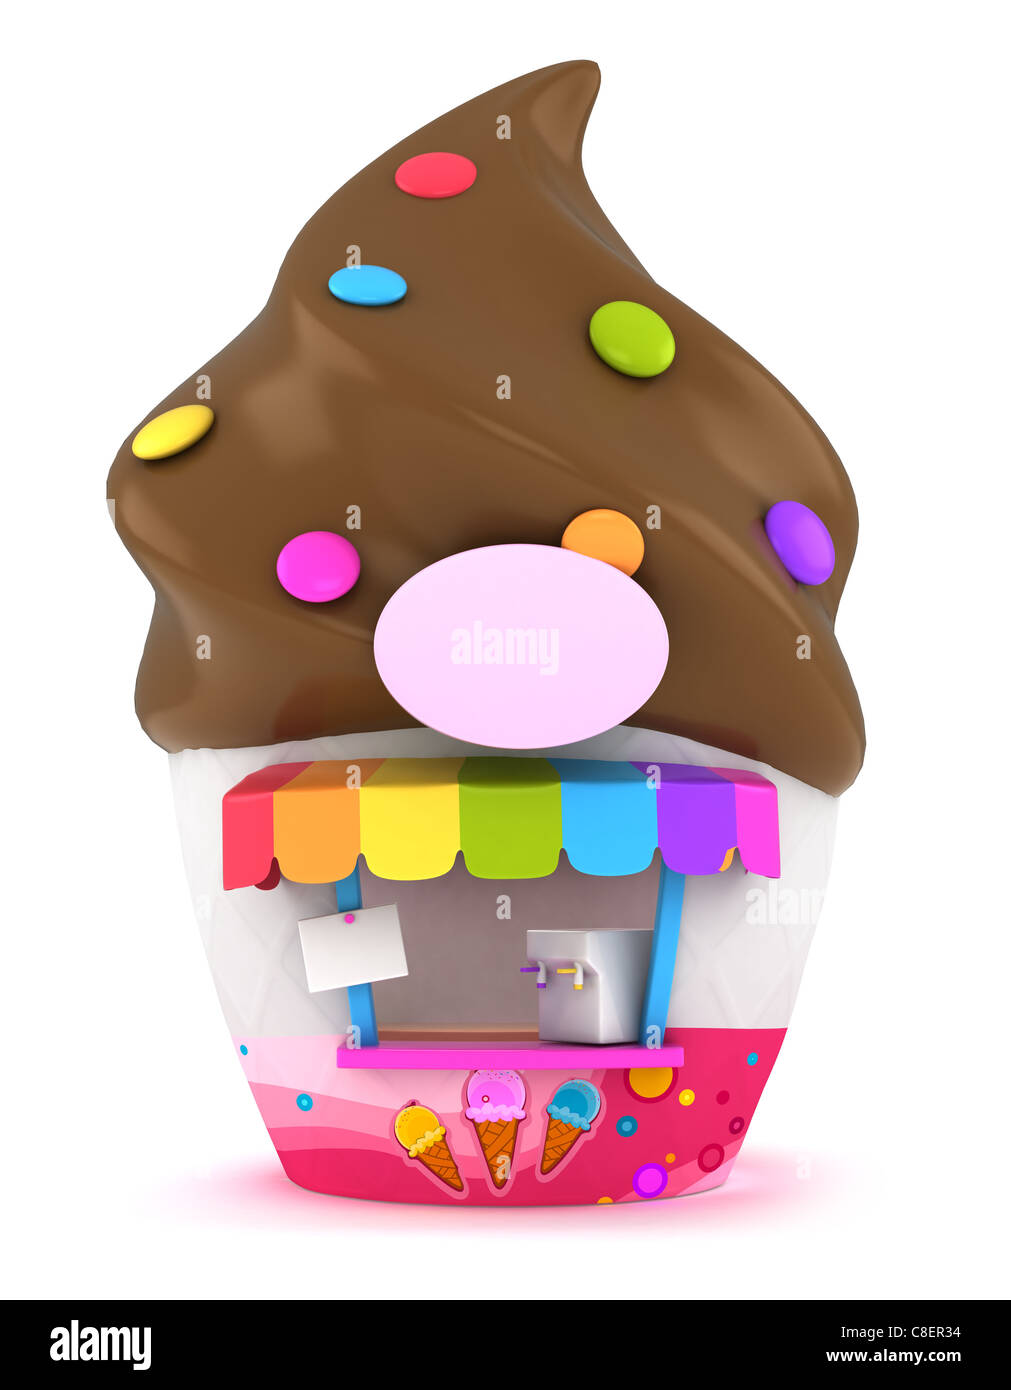 3D Illustration of an Funky Ice Cream Store Stock Photo